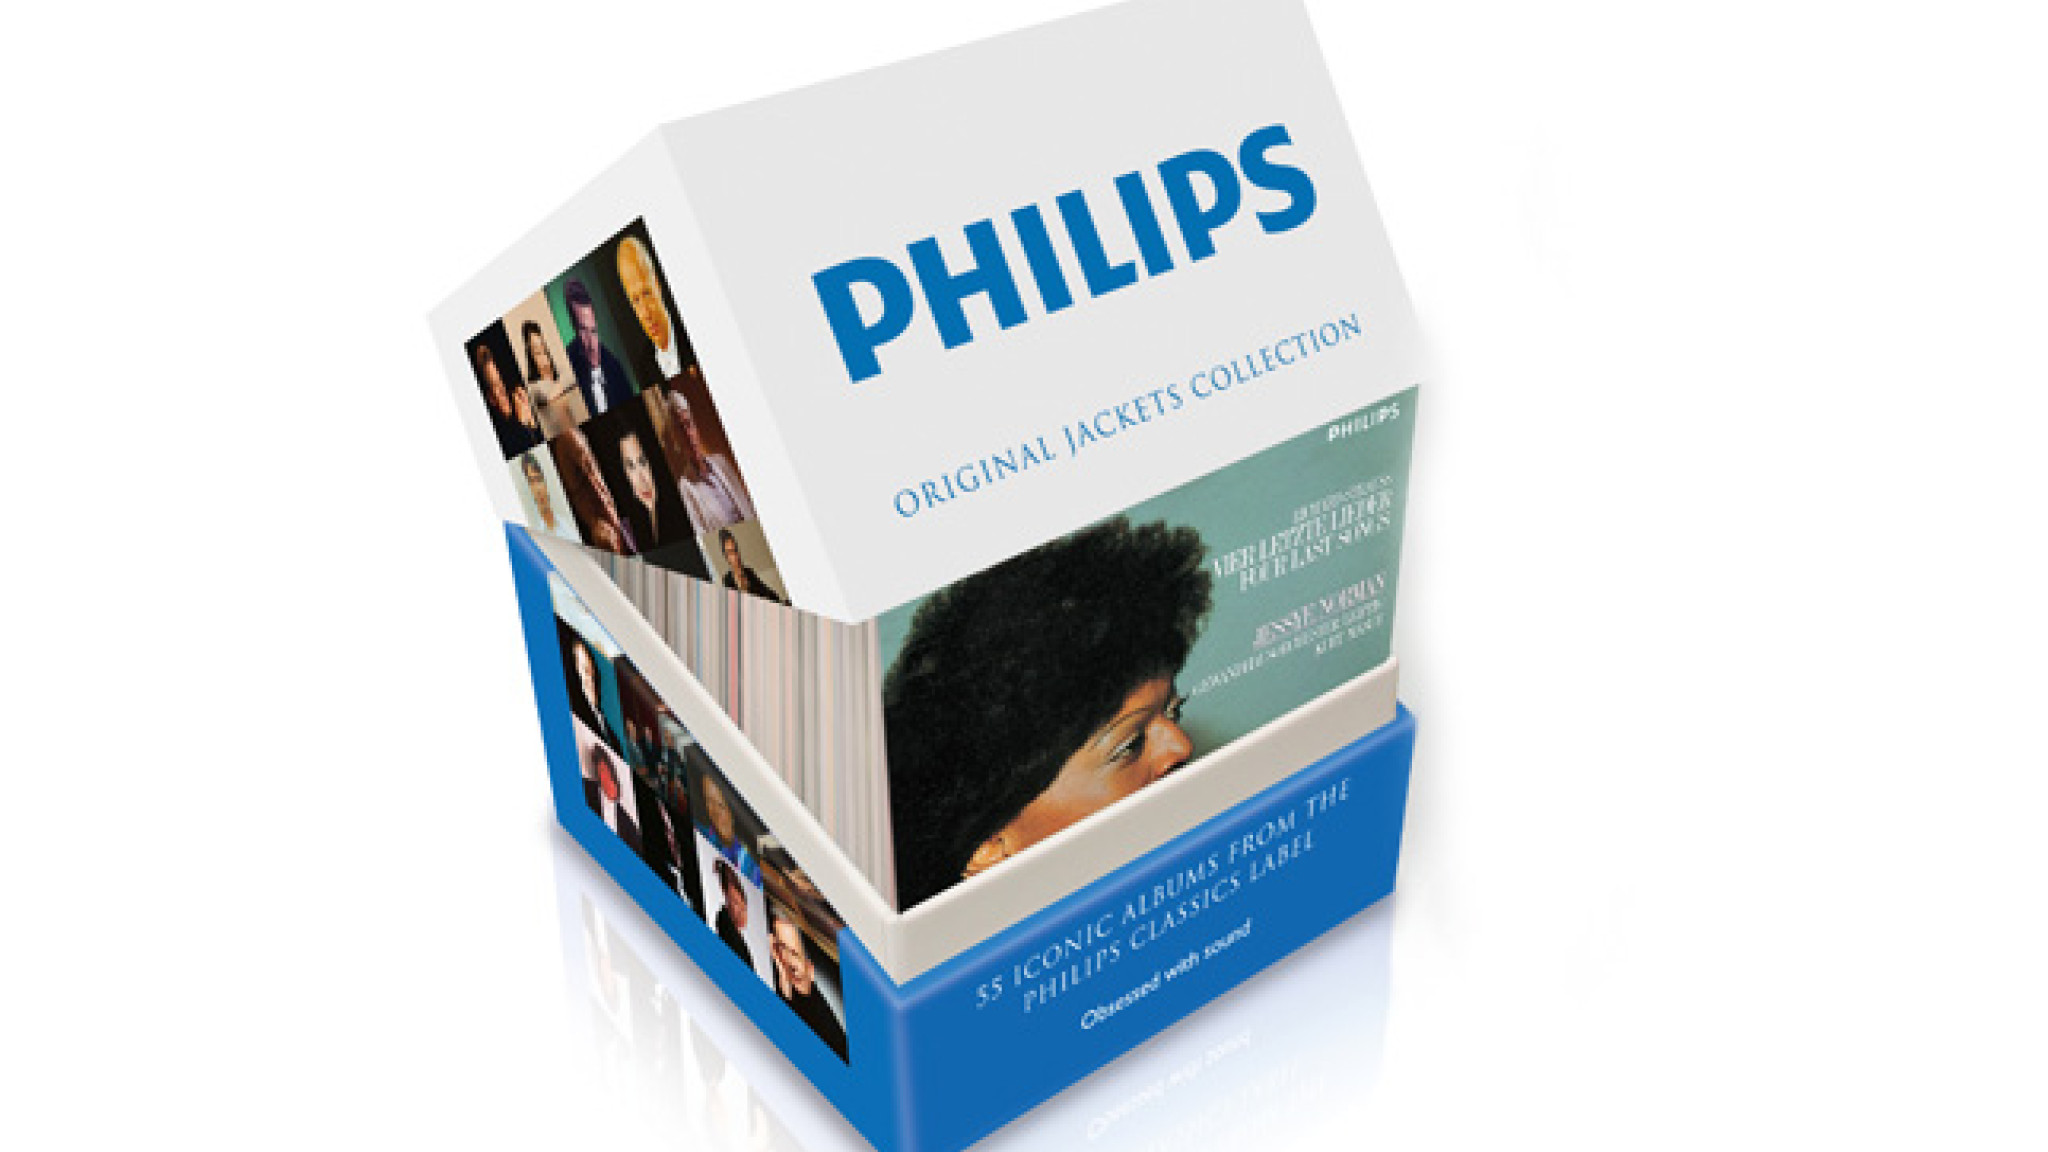 Philips Original Jackets Collection